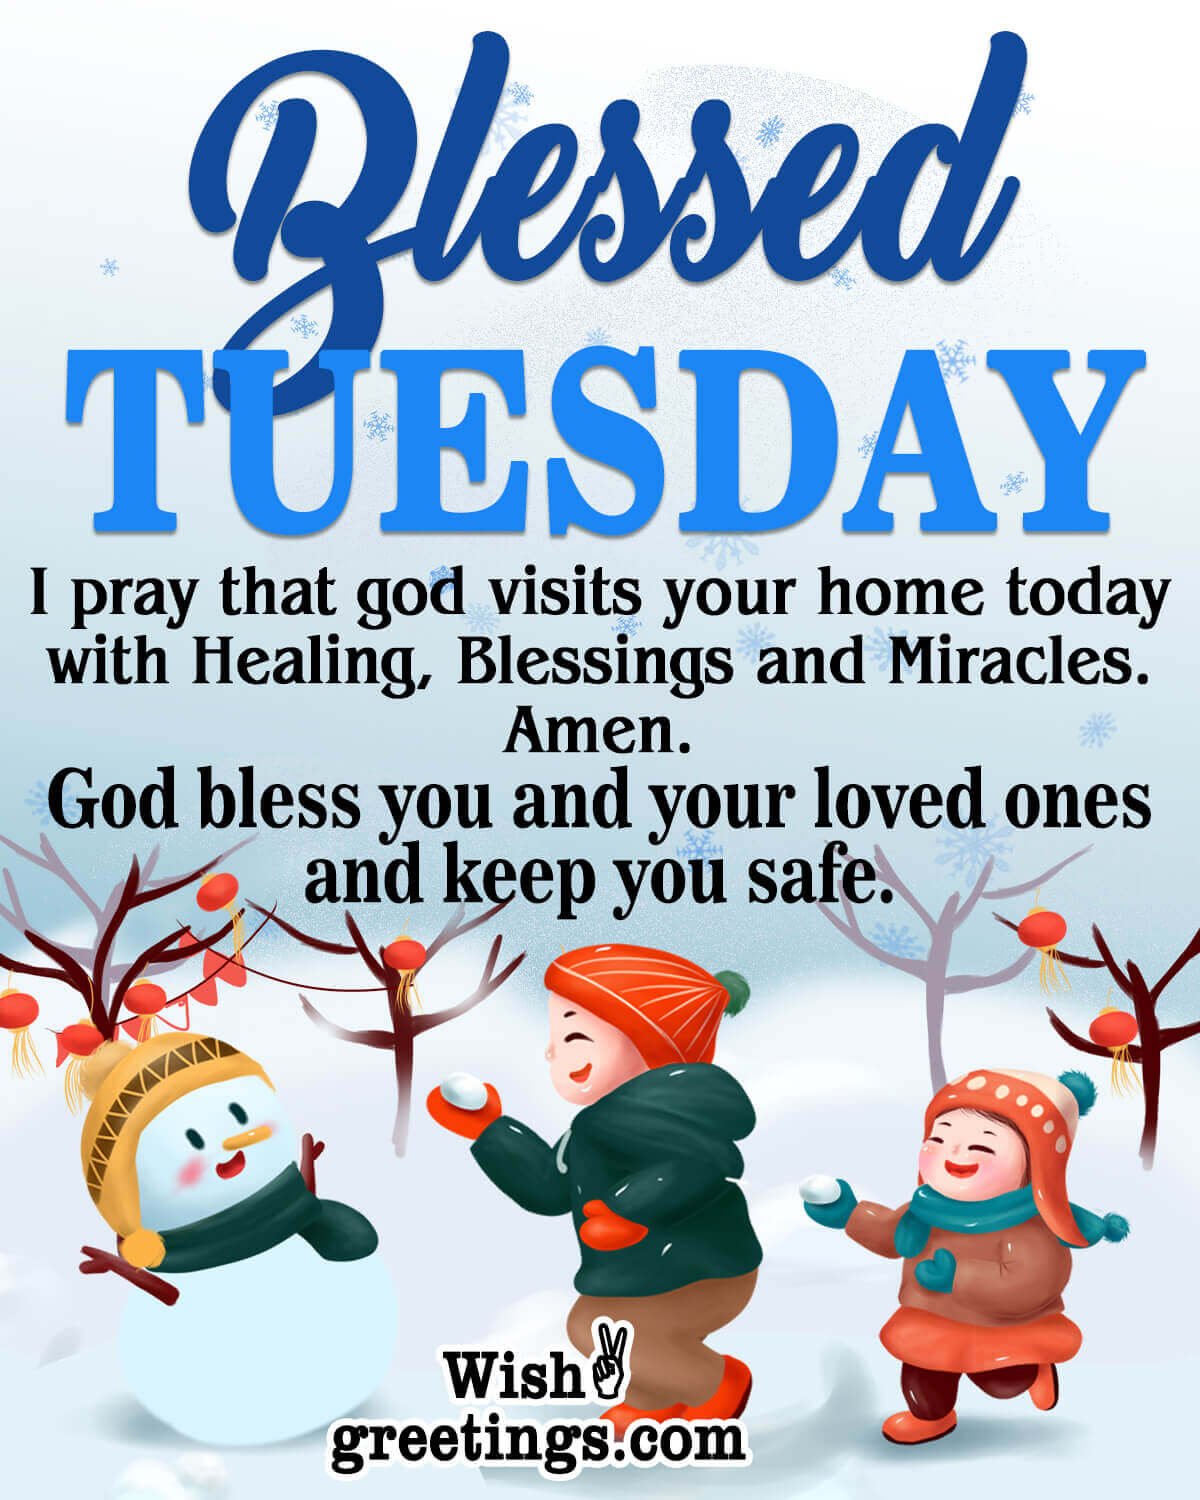 Blessed Tuesday Wish Photo